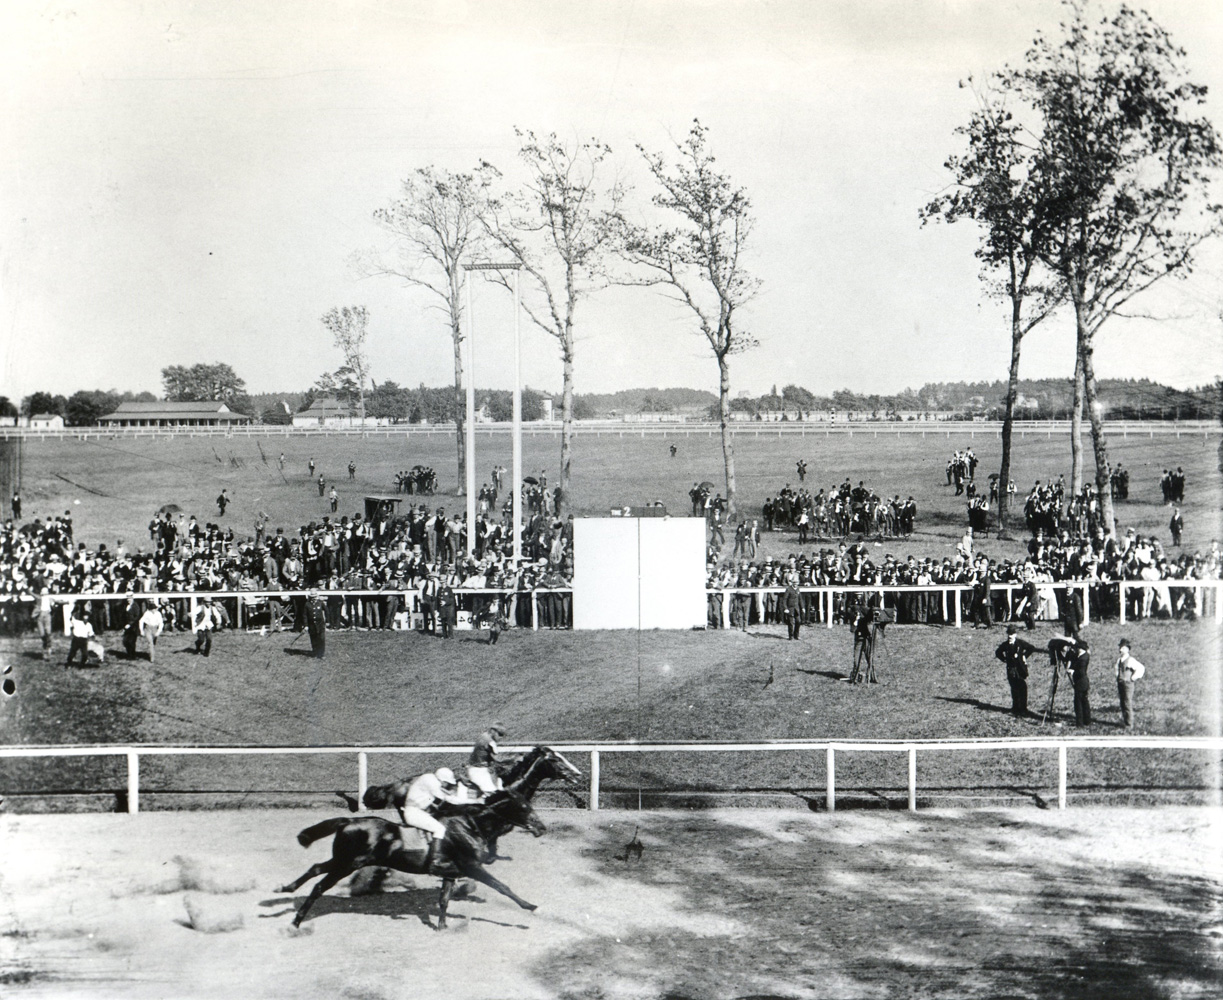 Isaac Murphy and Salvator defeating Snapper Garrison in Tenny in their match race at Sheepshead Bay in 1890 (Keeneland Library Hemment Collection/Museum Collection)